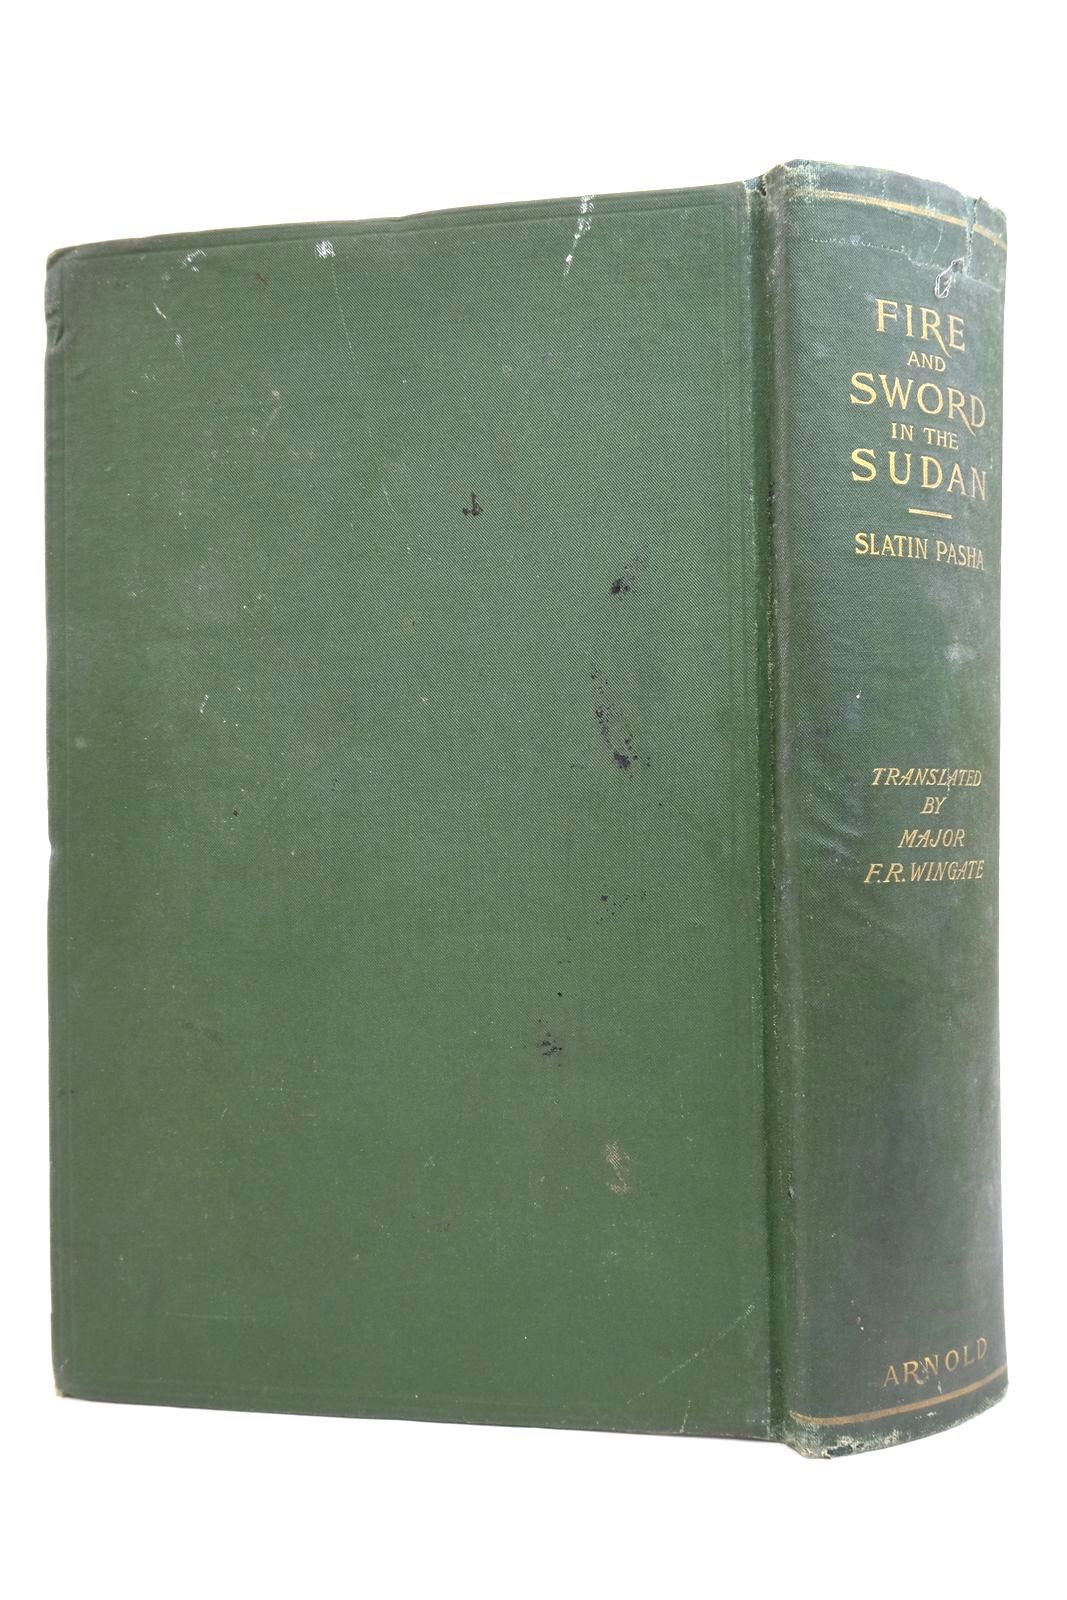 Photo of FIRE AND SWORD IN THE SUDAN written by Slatin, R. illustrated by Kelly, R. Talbot published by Edward Arnold (STOCK CODE: 2135060)  for sale by Stella & Rose's Books